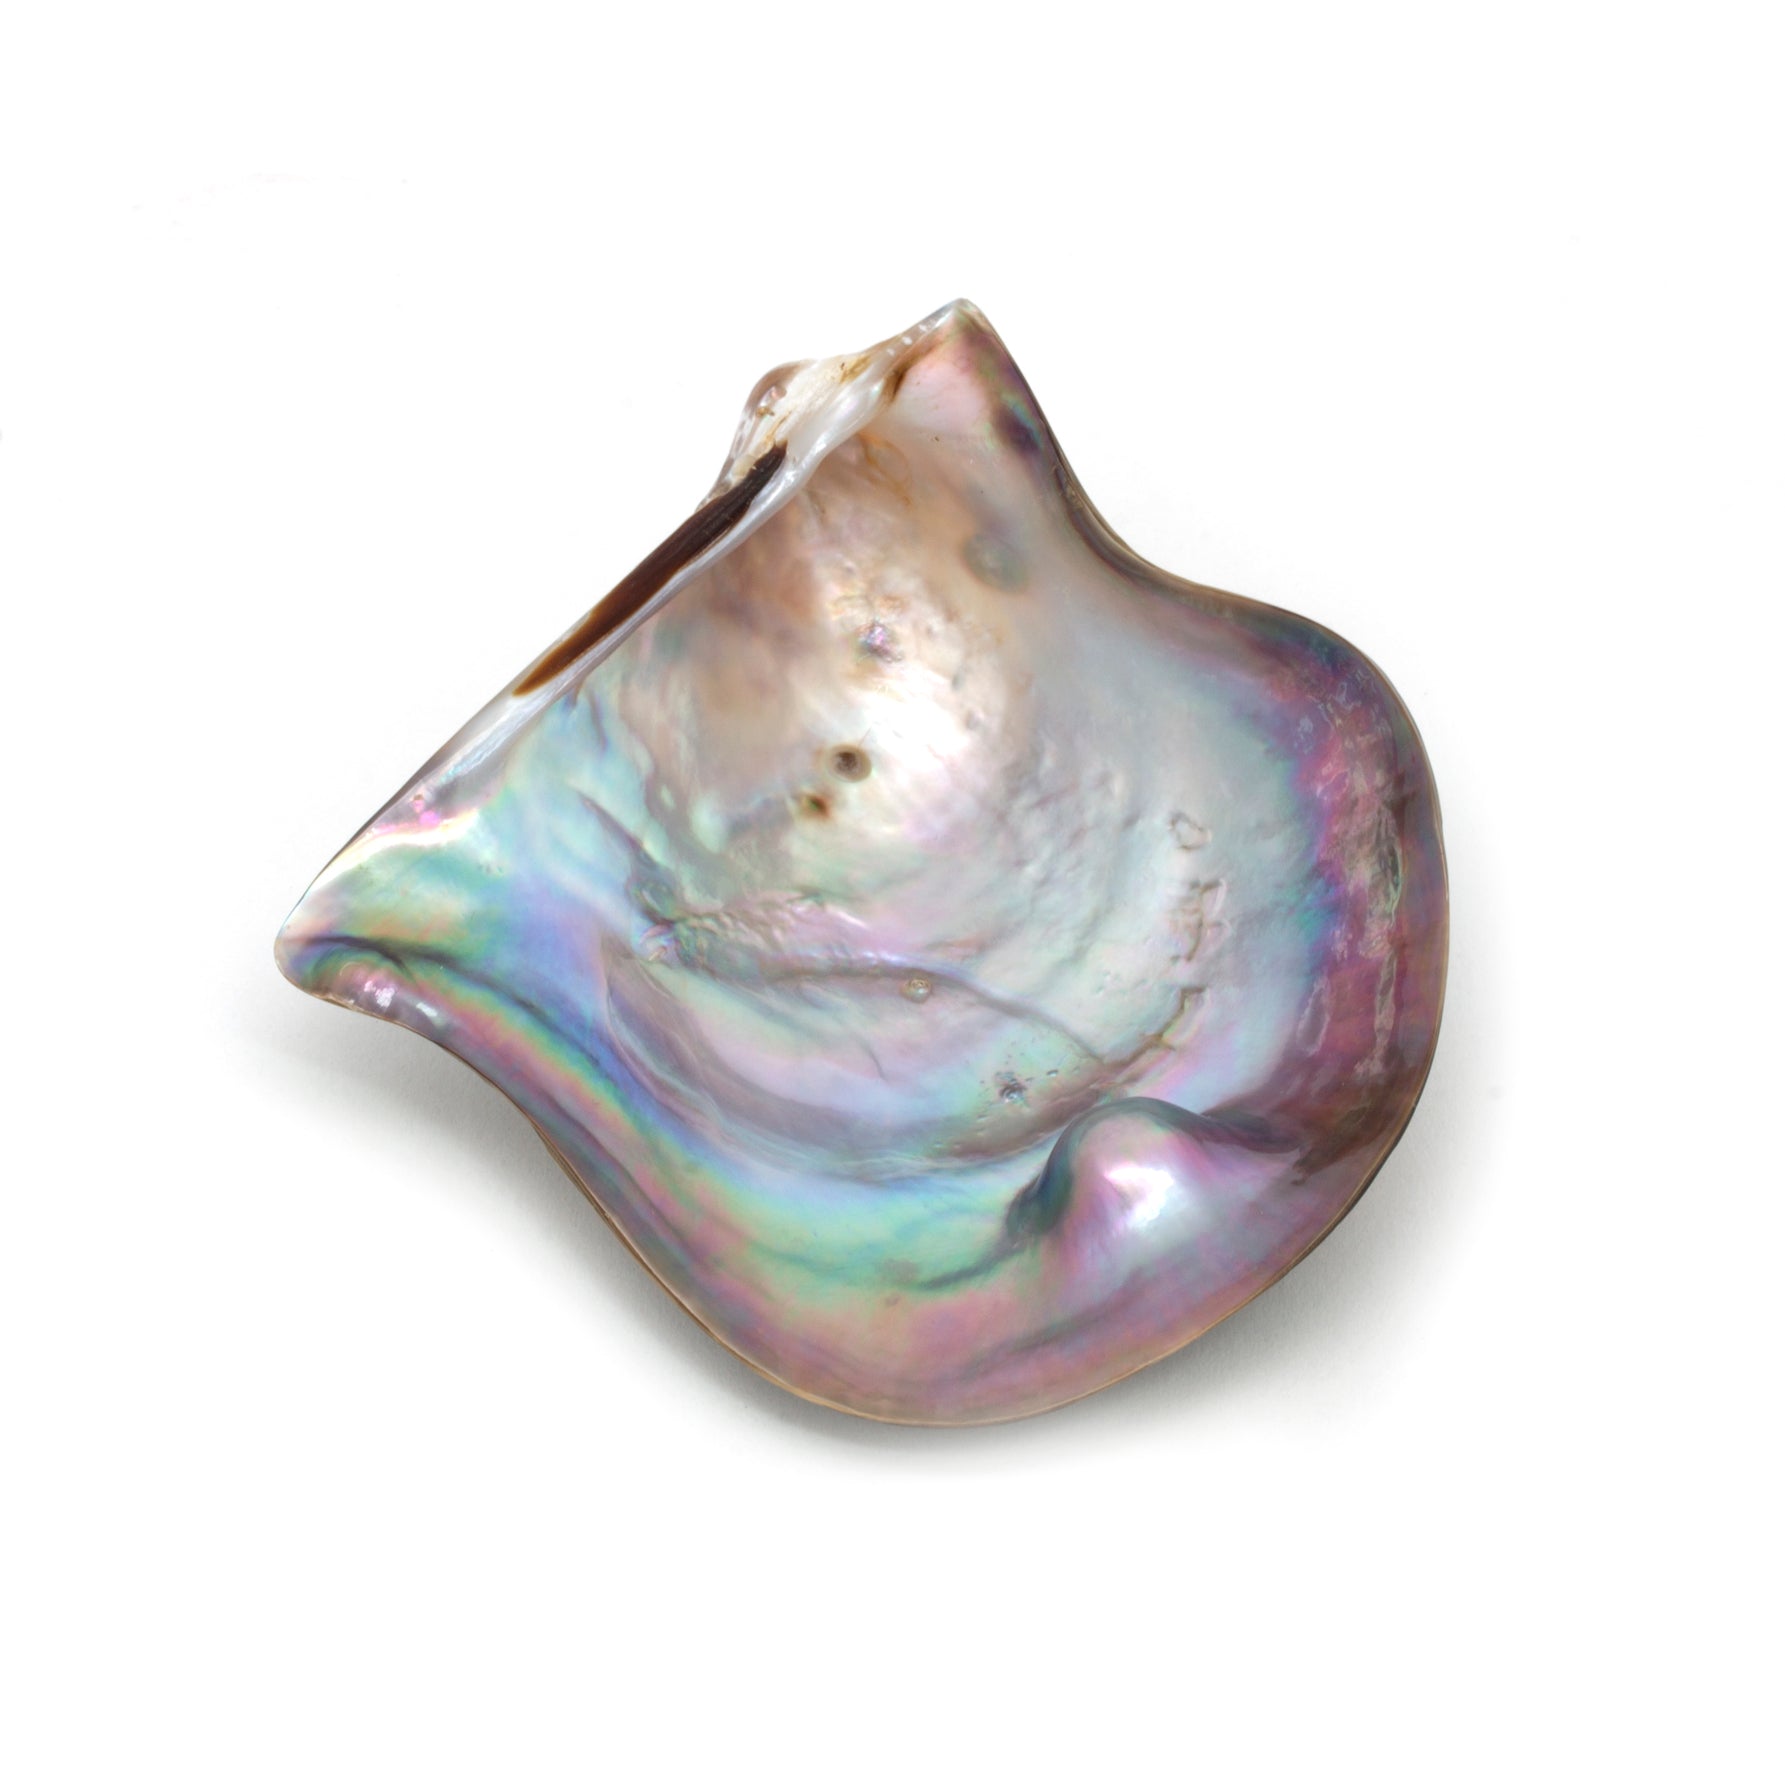 Polished "Rainbow Lip" Shell (Pteria sterna) from the Sea of Cortez